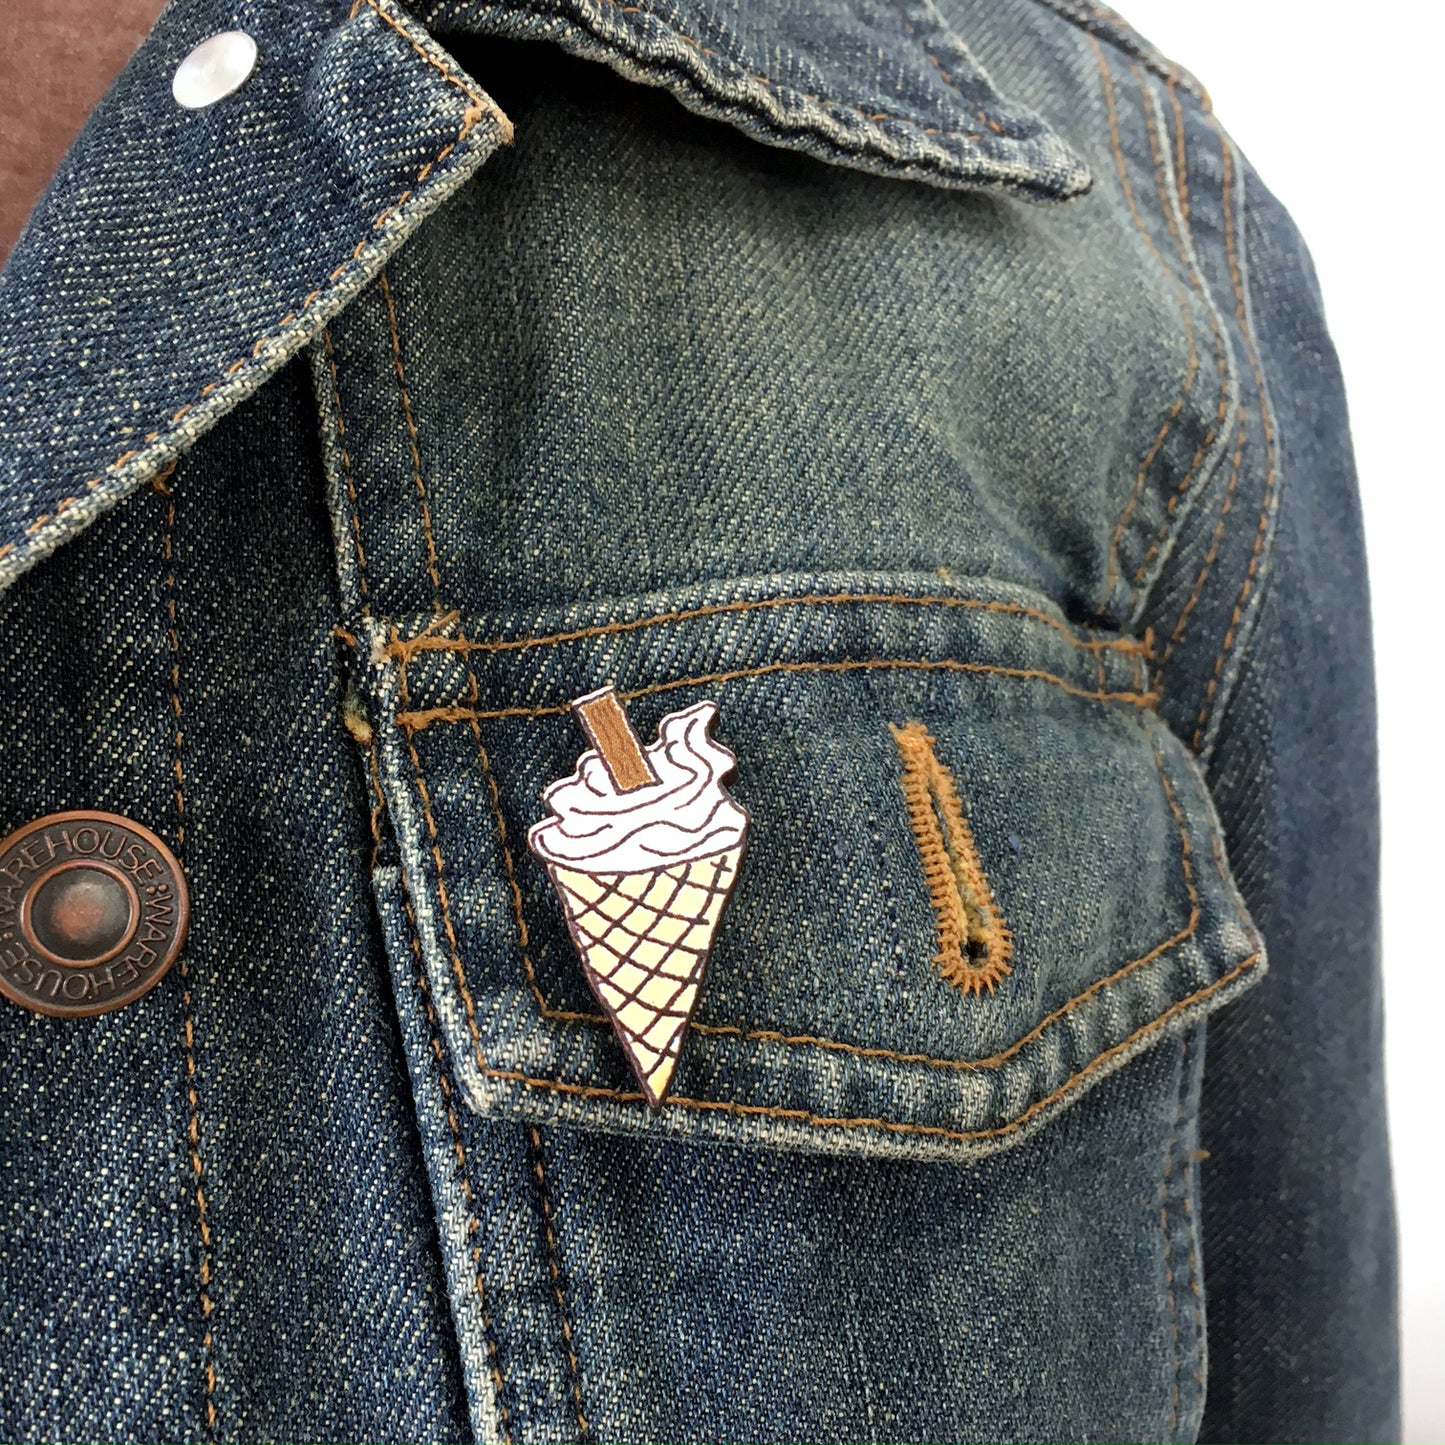 Ice cream cone wooden pin - Great gift for girls